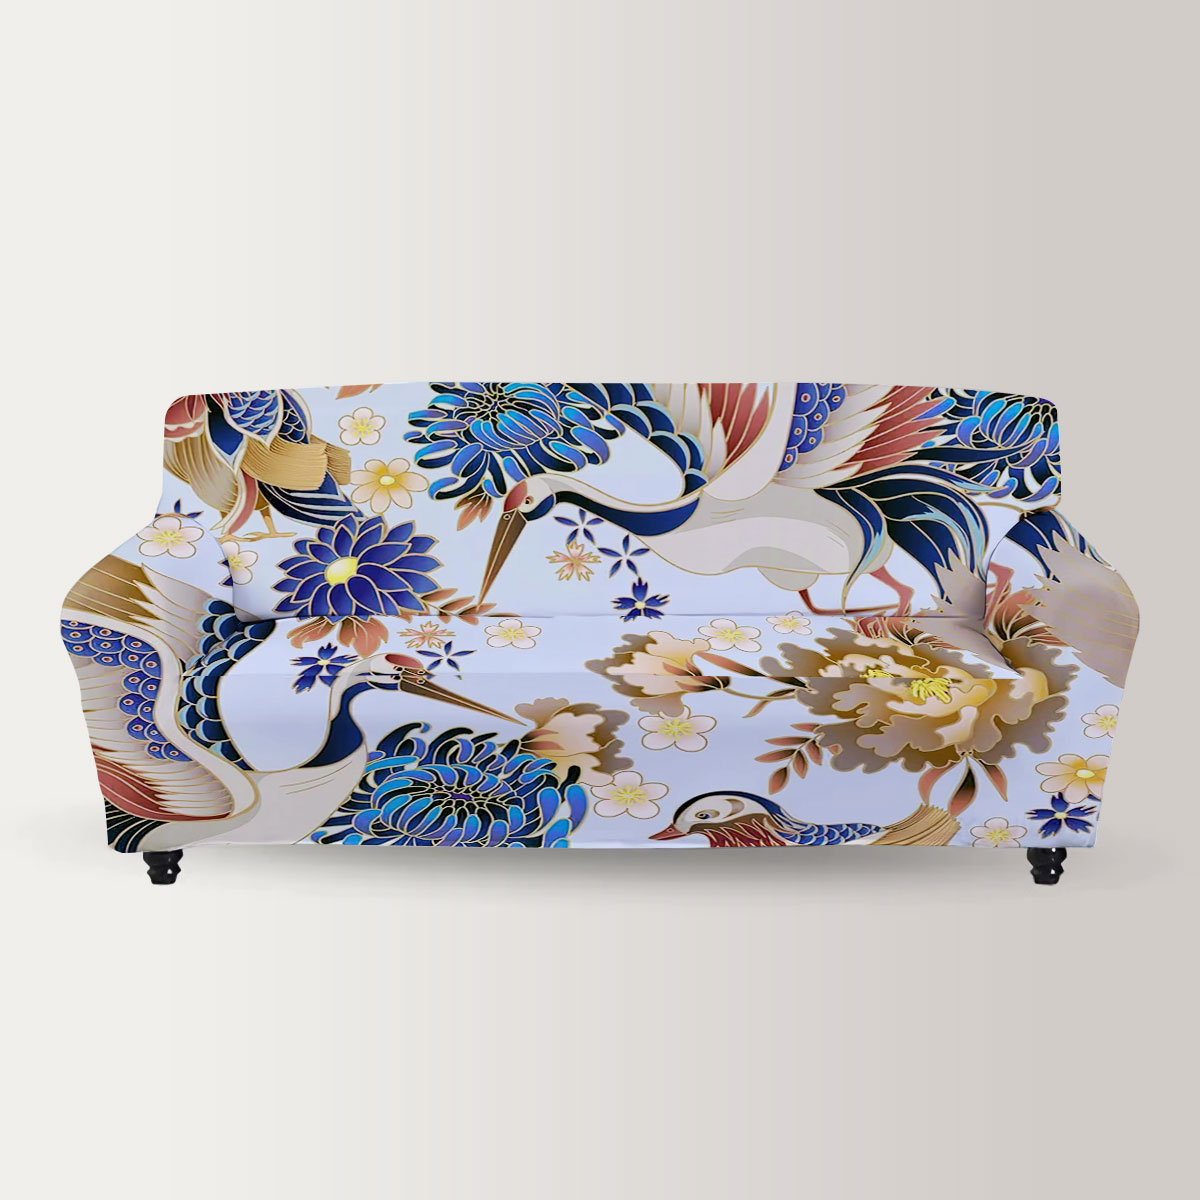 Vintage Heron And Flower Sofa Cover